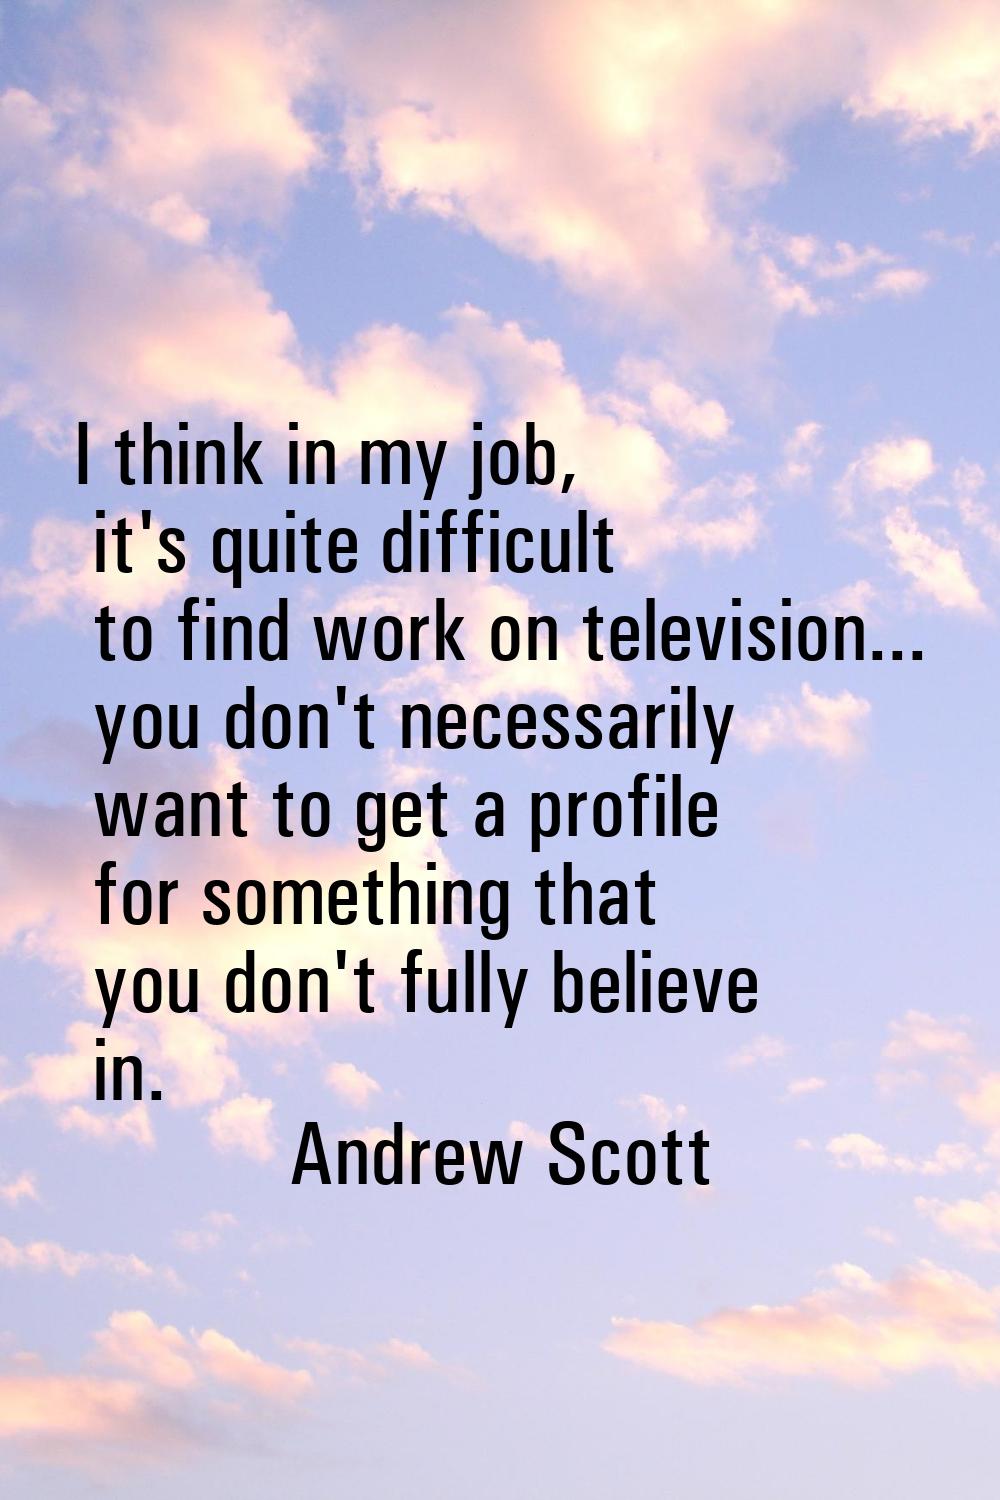 I think in my job, it's quite difficult to find work on television... you don't necessarily want to